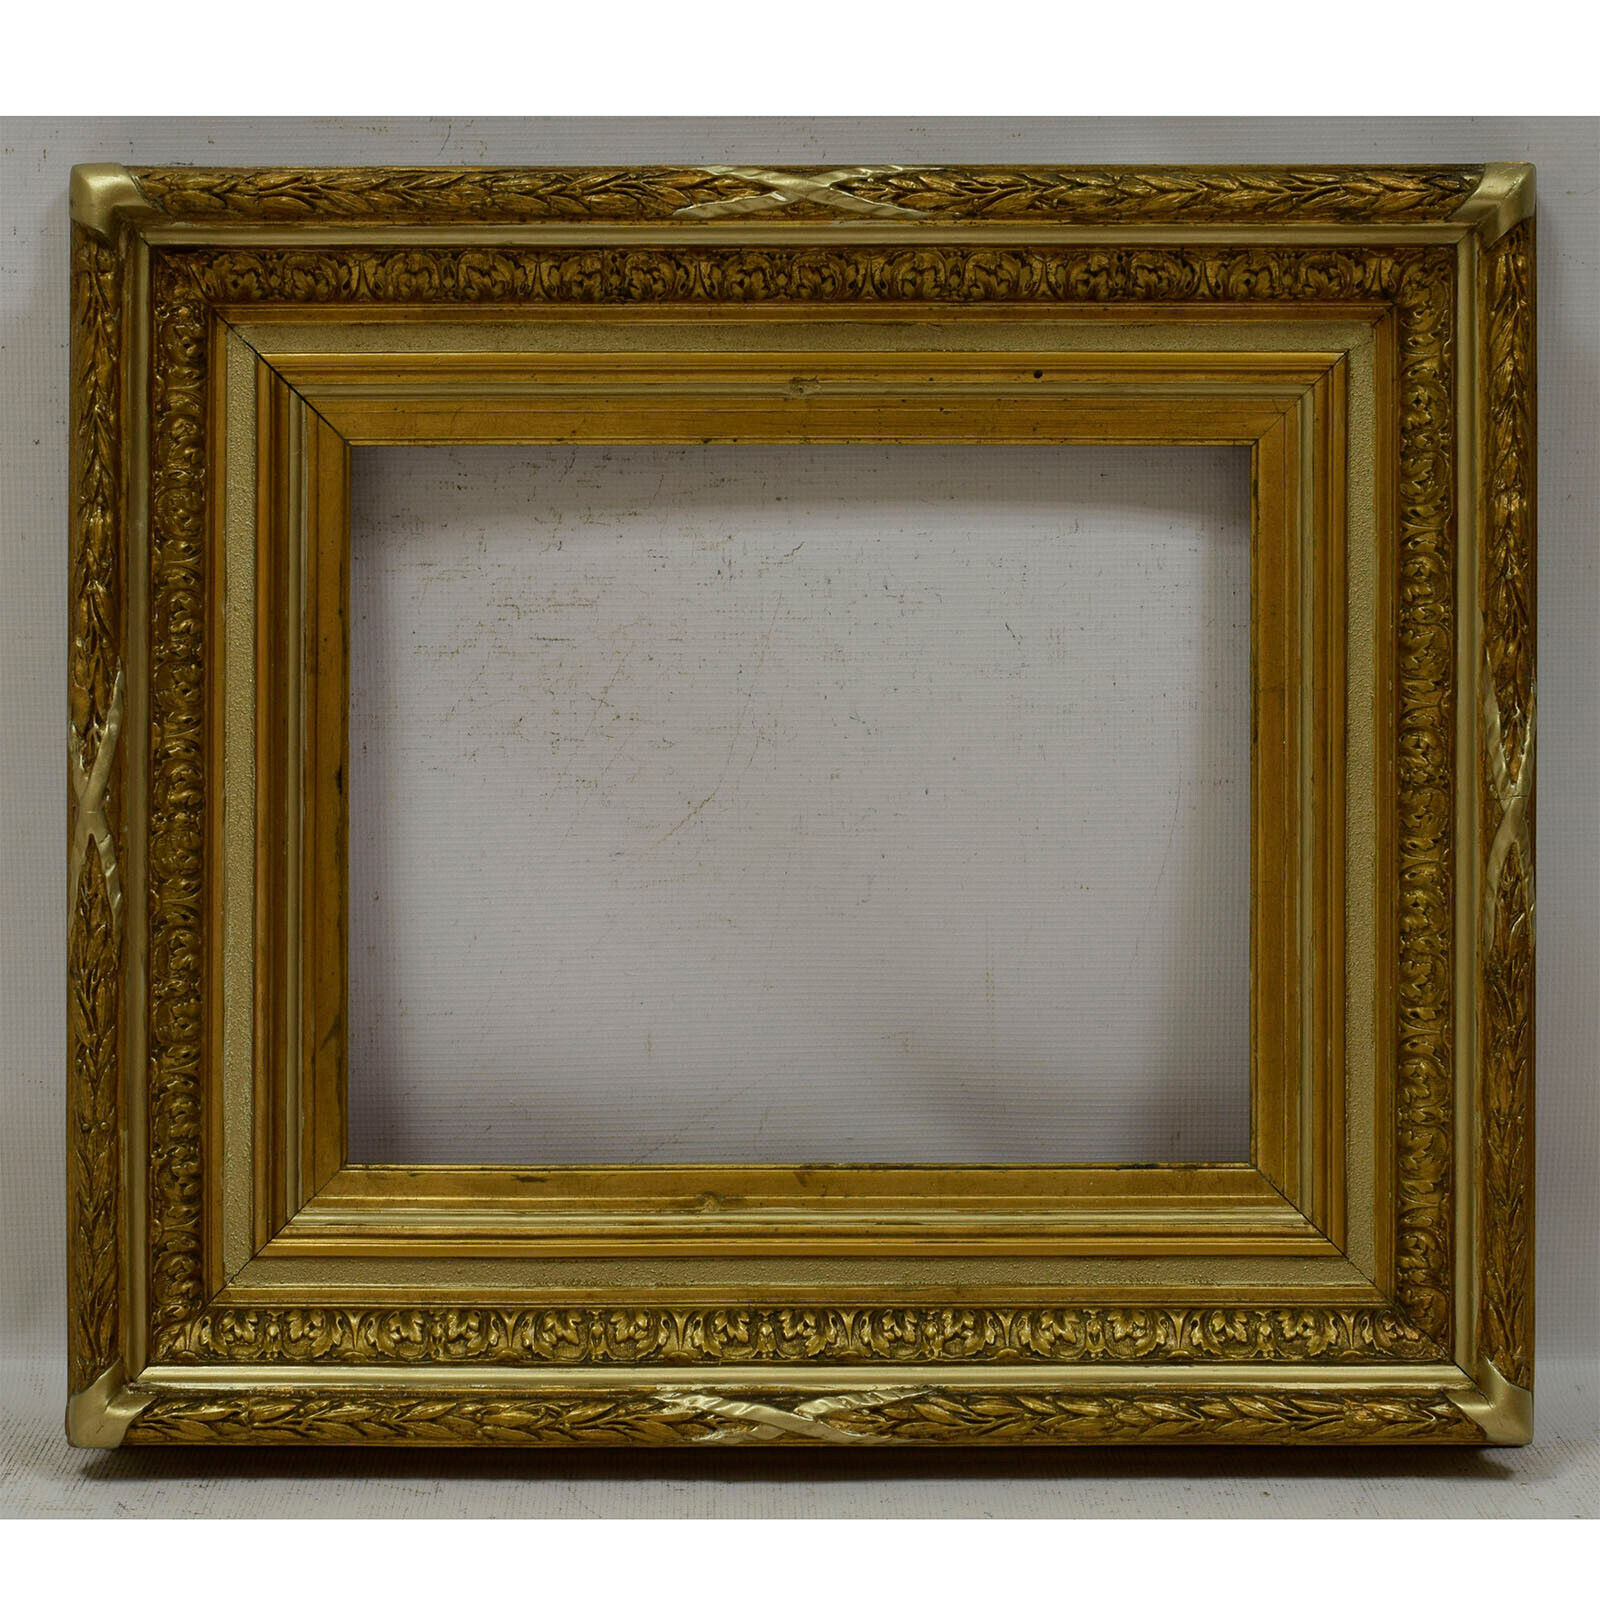 Ca 1900 Old wooden frame Original condition with gold color Internal: 16,3x13,1